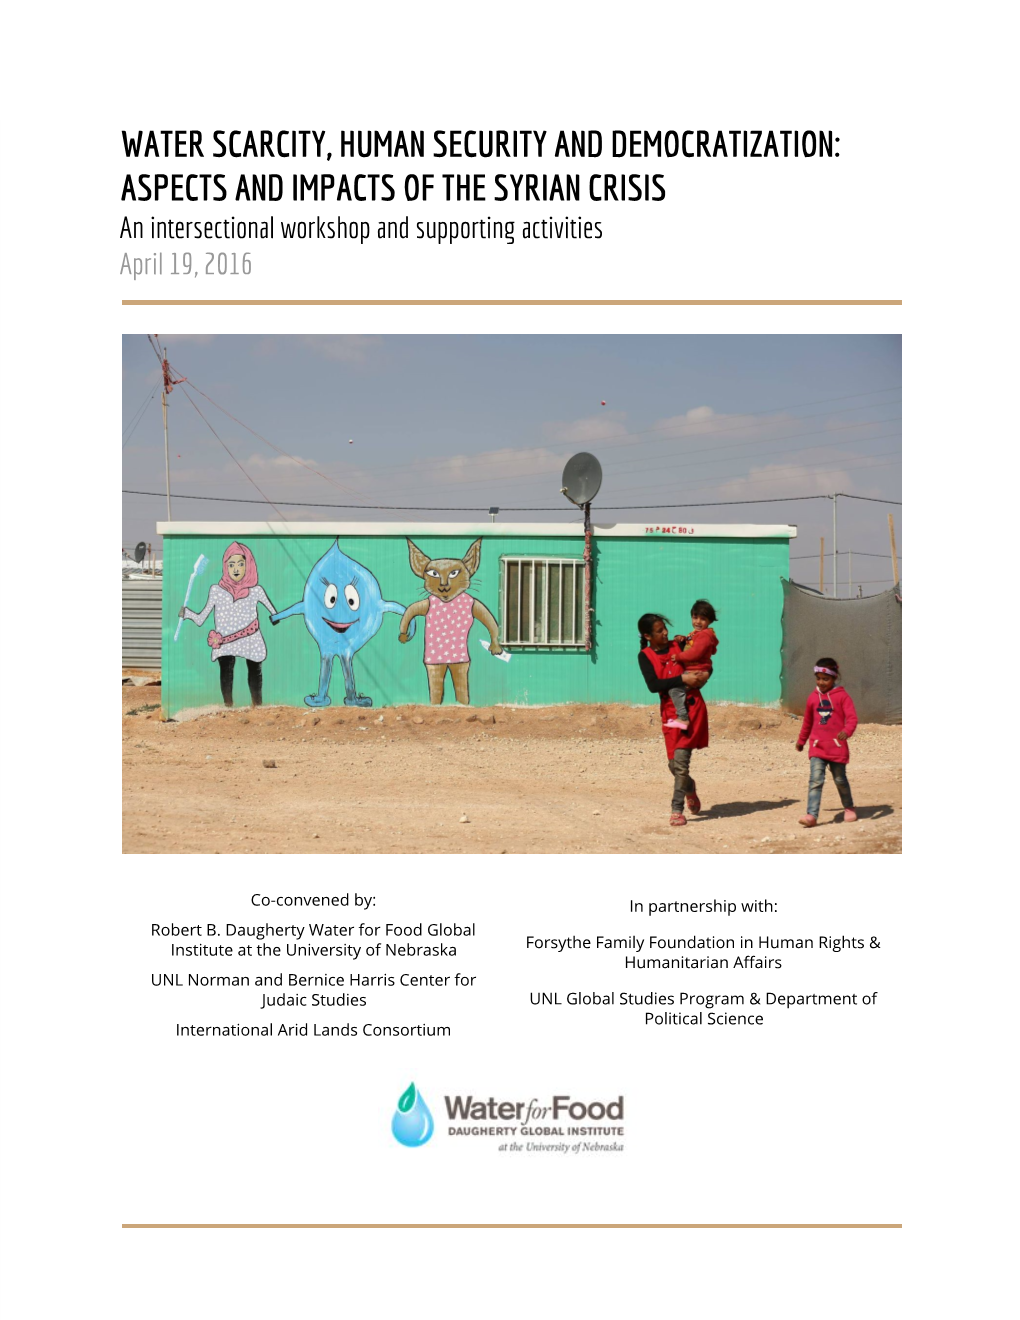 WATER SCARCITY, HUMAN SECURITY and DEMOCRATIZATION: ASPECTS and IMPACTS of the SYRIAN CRISIS an Intersectional Workshop and Supporting Activities April 19, 2016